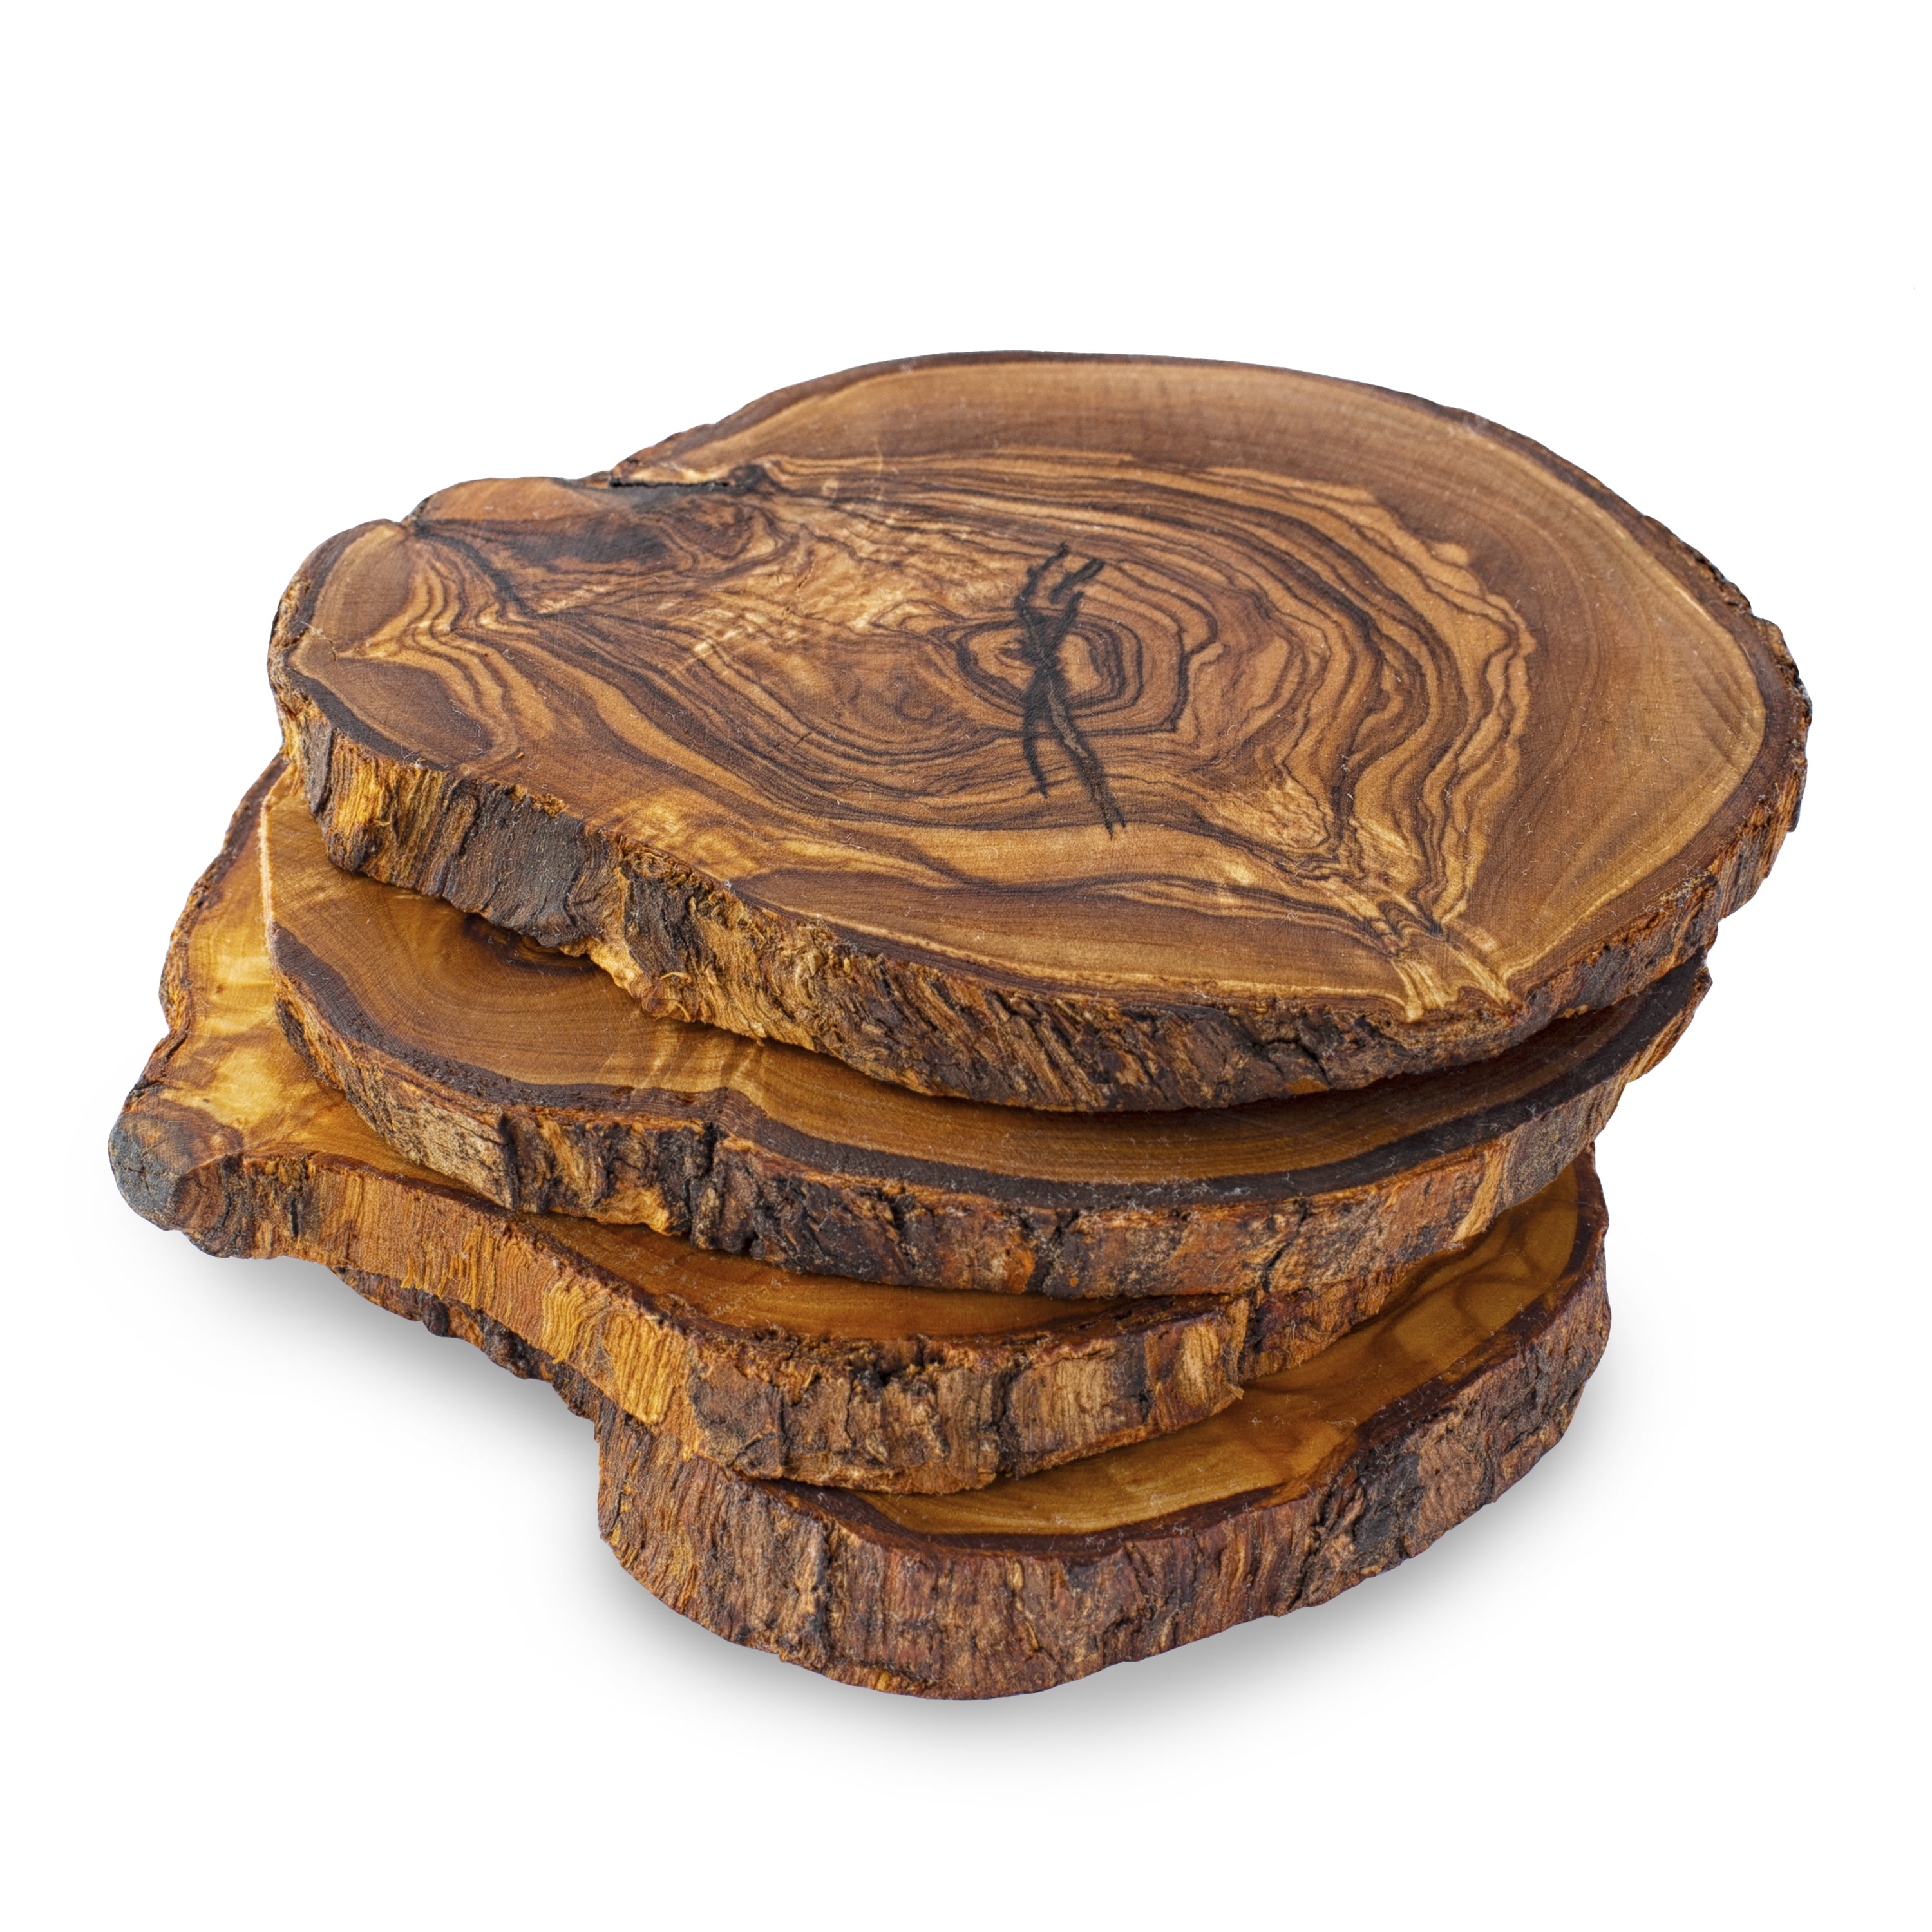 Dropship Olive Wood Coaster Set With Holder -7 Pcs to Sell Online